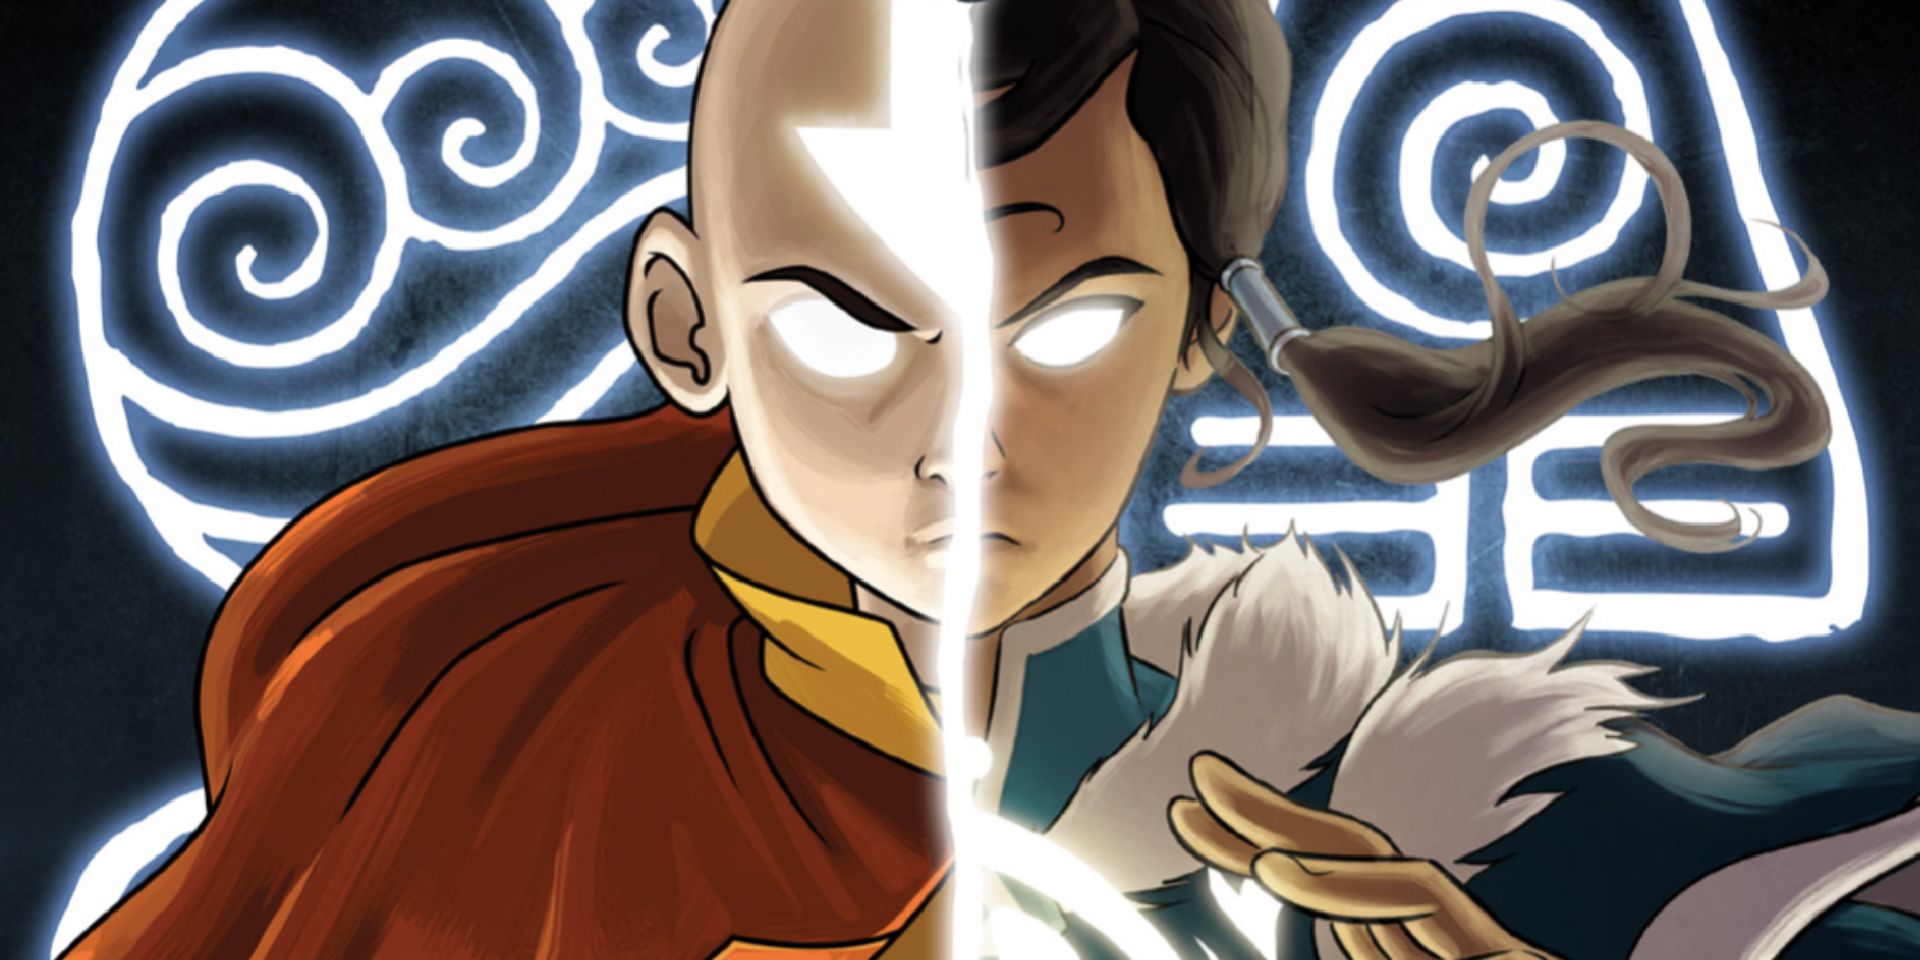 An image showing a split between Aang and Korra in the Avatar universe. 